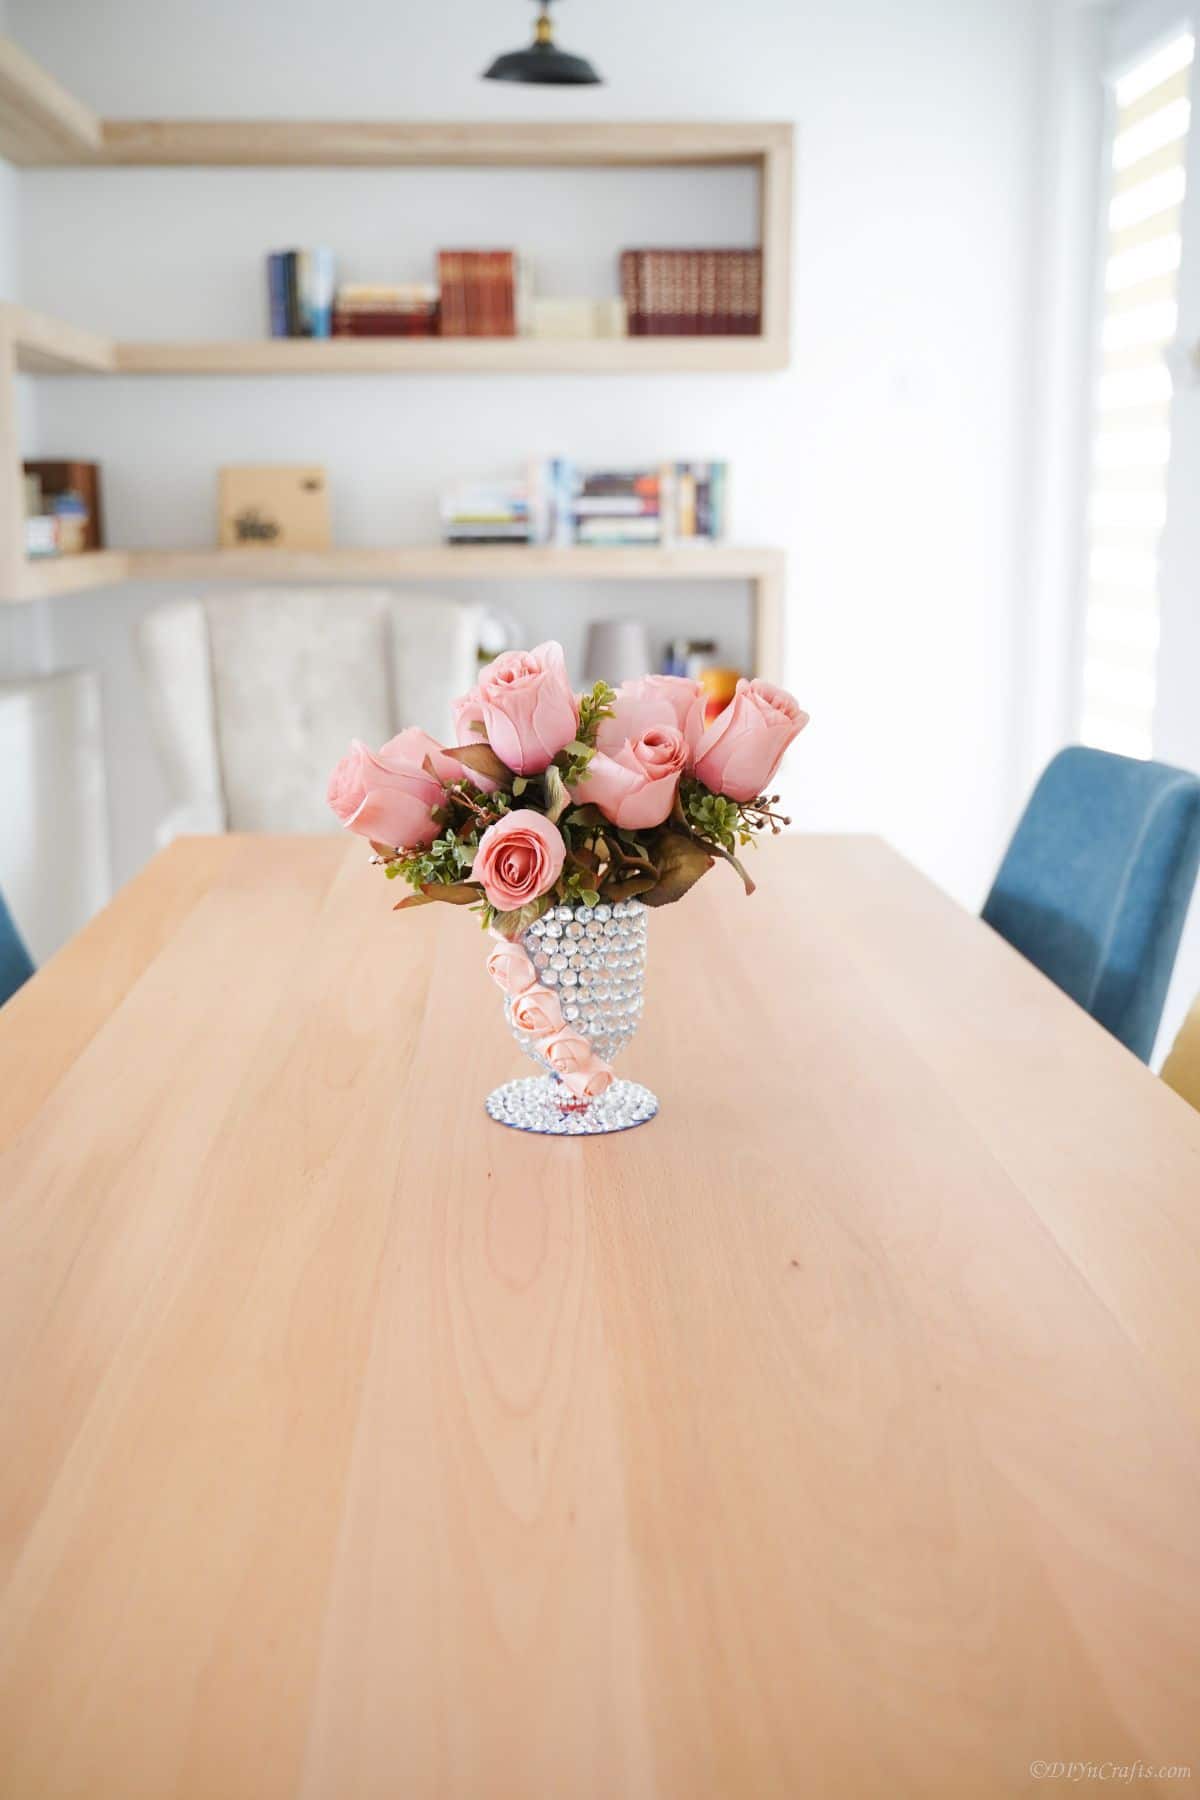 dining table with blue chairs and rhinestone vase of roses in center